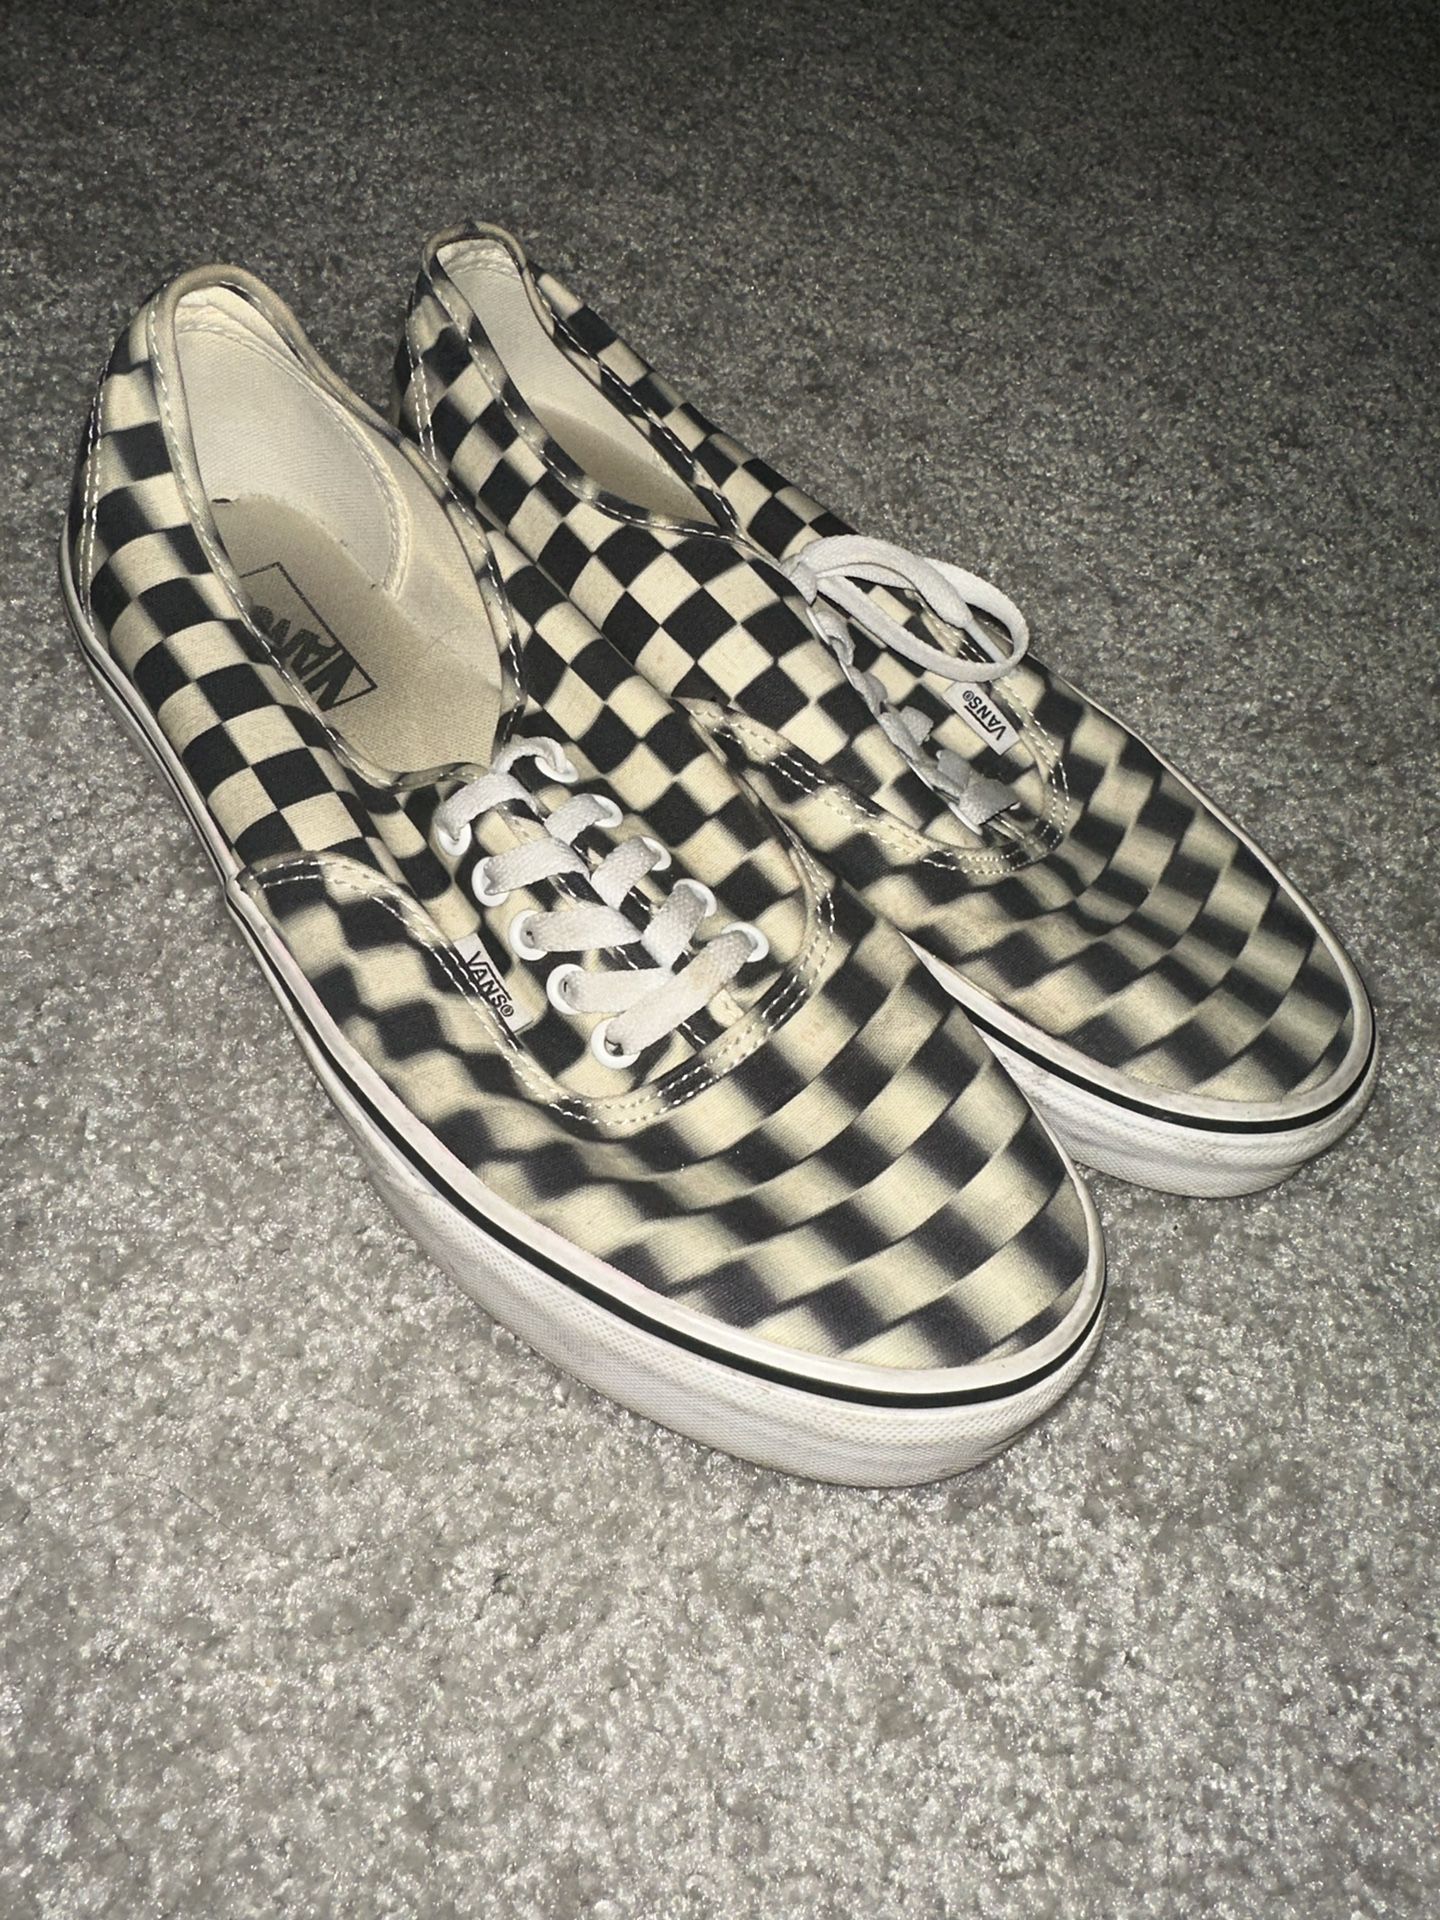 Checkered Low Top Vans Size 11